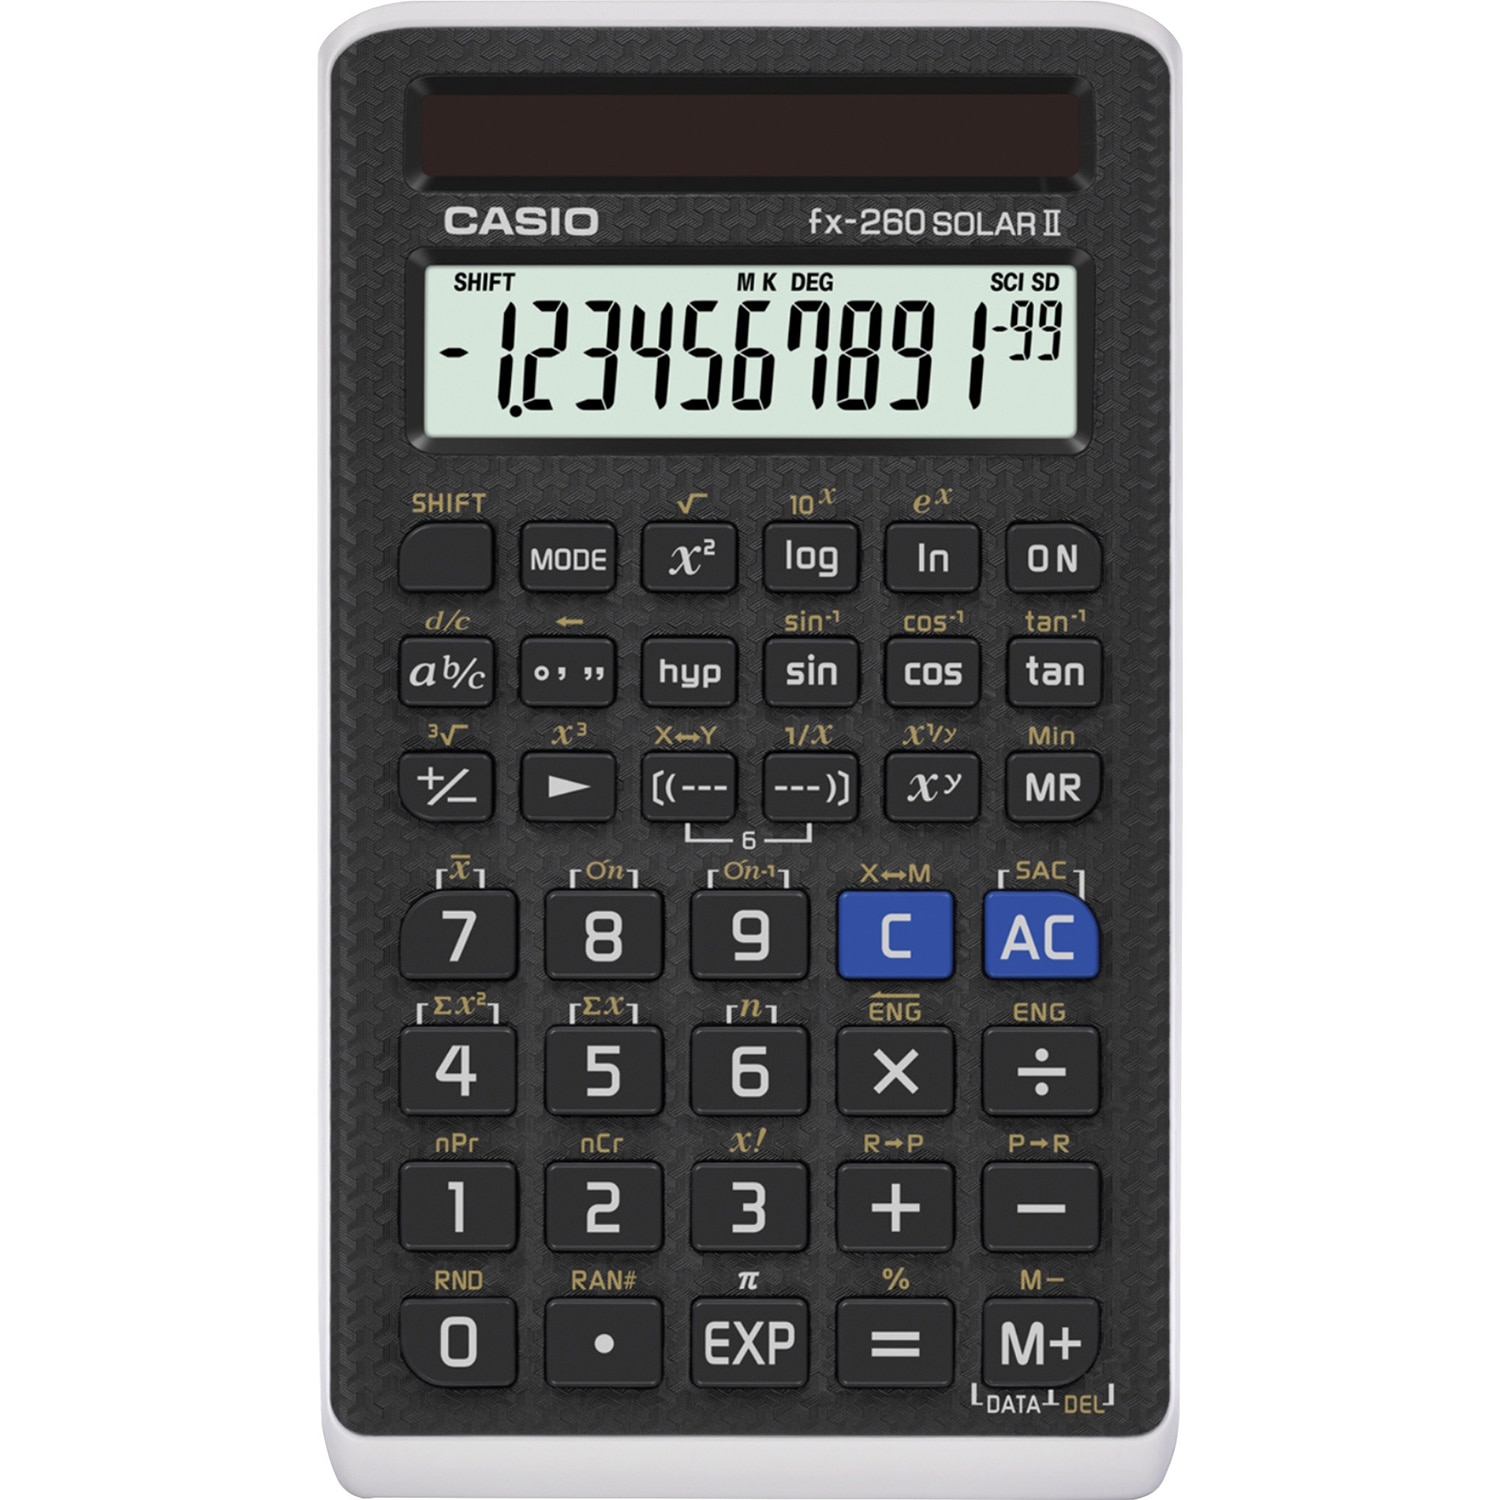 All purpose Scientific Calculator offers fraction calculations, trigonometric functions and more. Includes a slide-on hard case and it is solar powered.